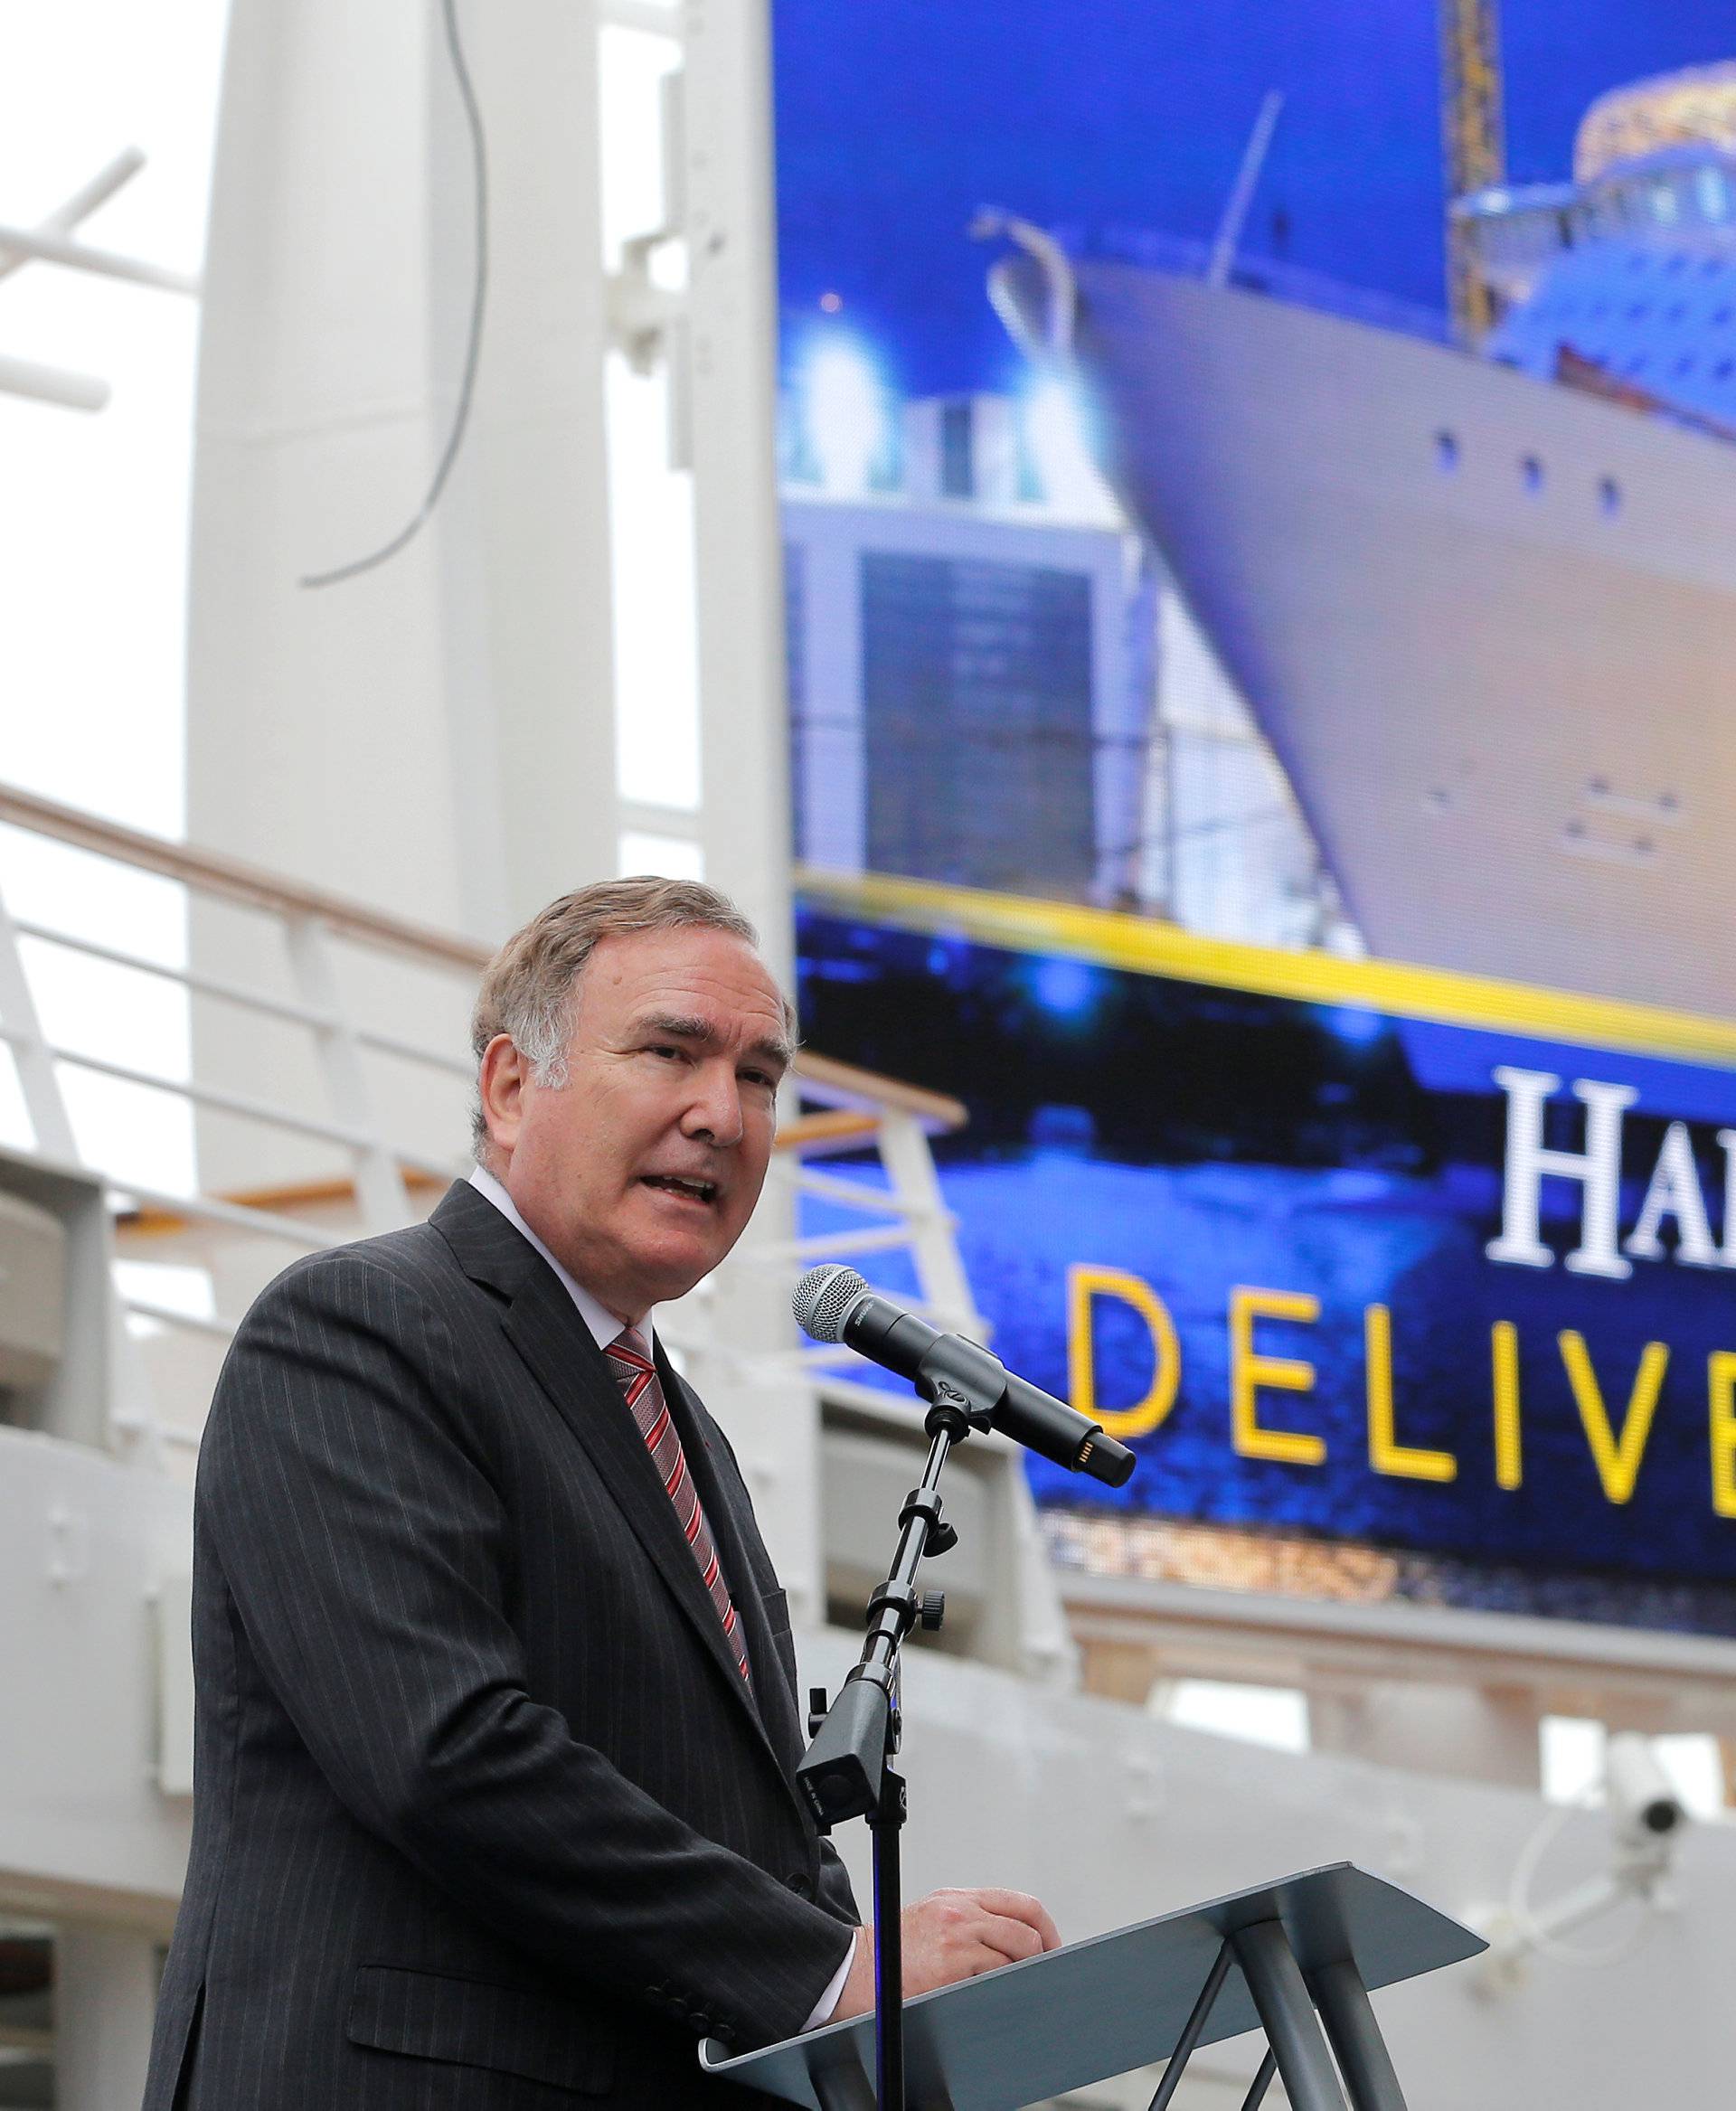 Richard Fain, Chairman and CEO of cruise operator Royal Caribbean attends the delivery ceremony of the Harmony of the Seas (Oasis 3) class ship at the STX Les Chantiers de l'Atlantique shipyard site in Saint-Nazaire